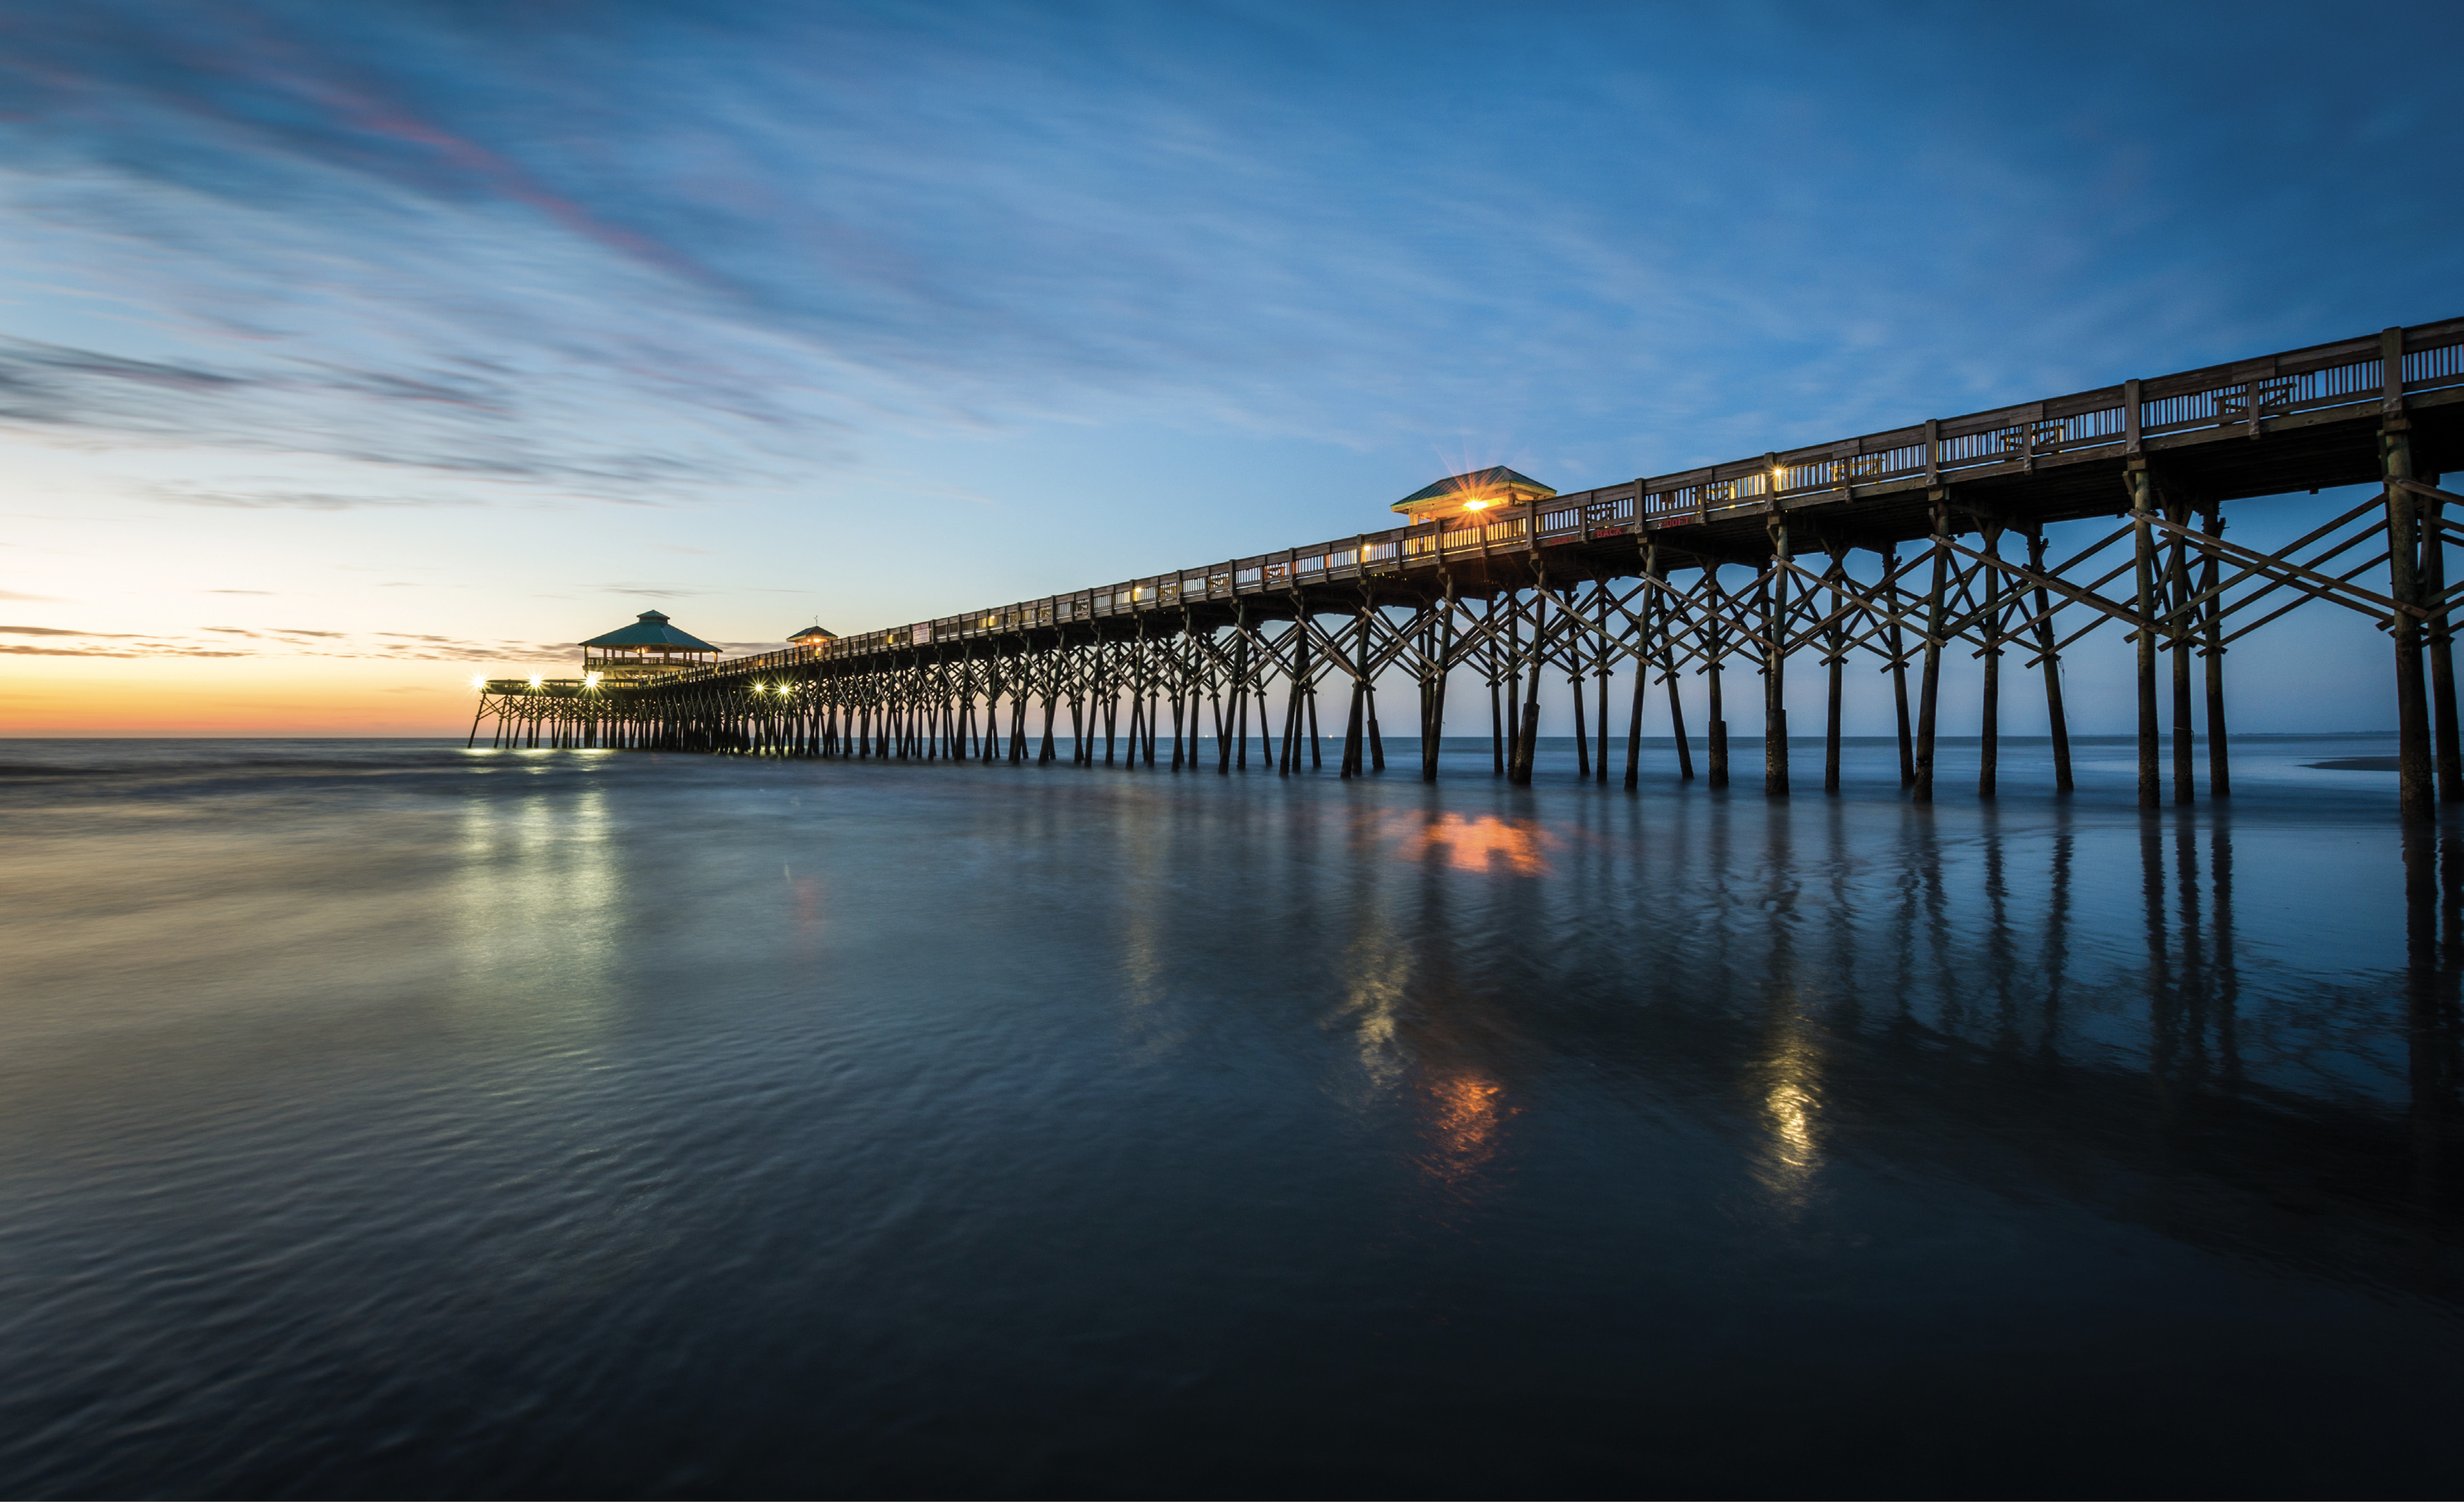 While there are plans to replace the 1,045-foot Edwin S. Taylor Fishing Pier, which opened on July 4, 1995, it will remain open to the public through the summer season.